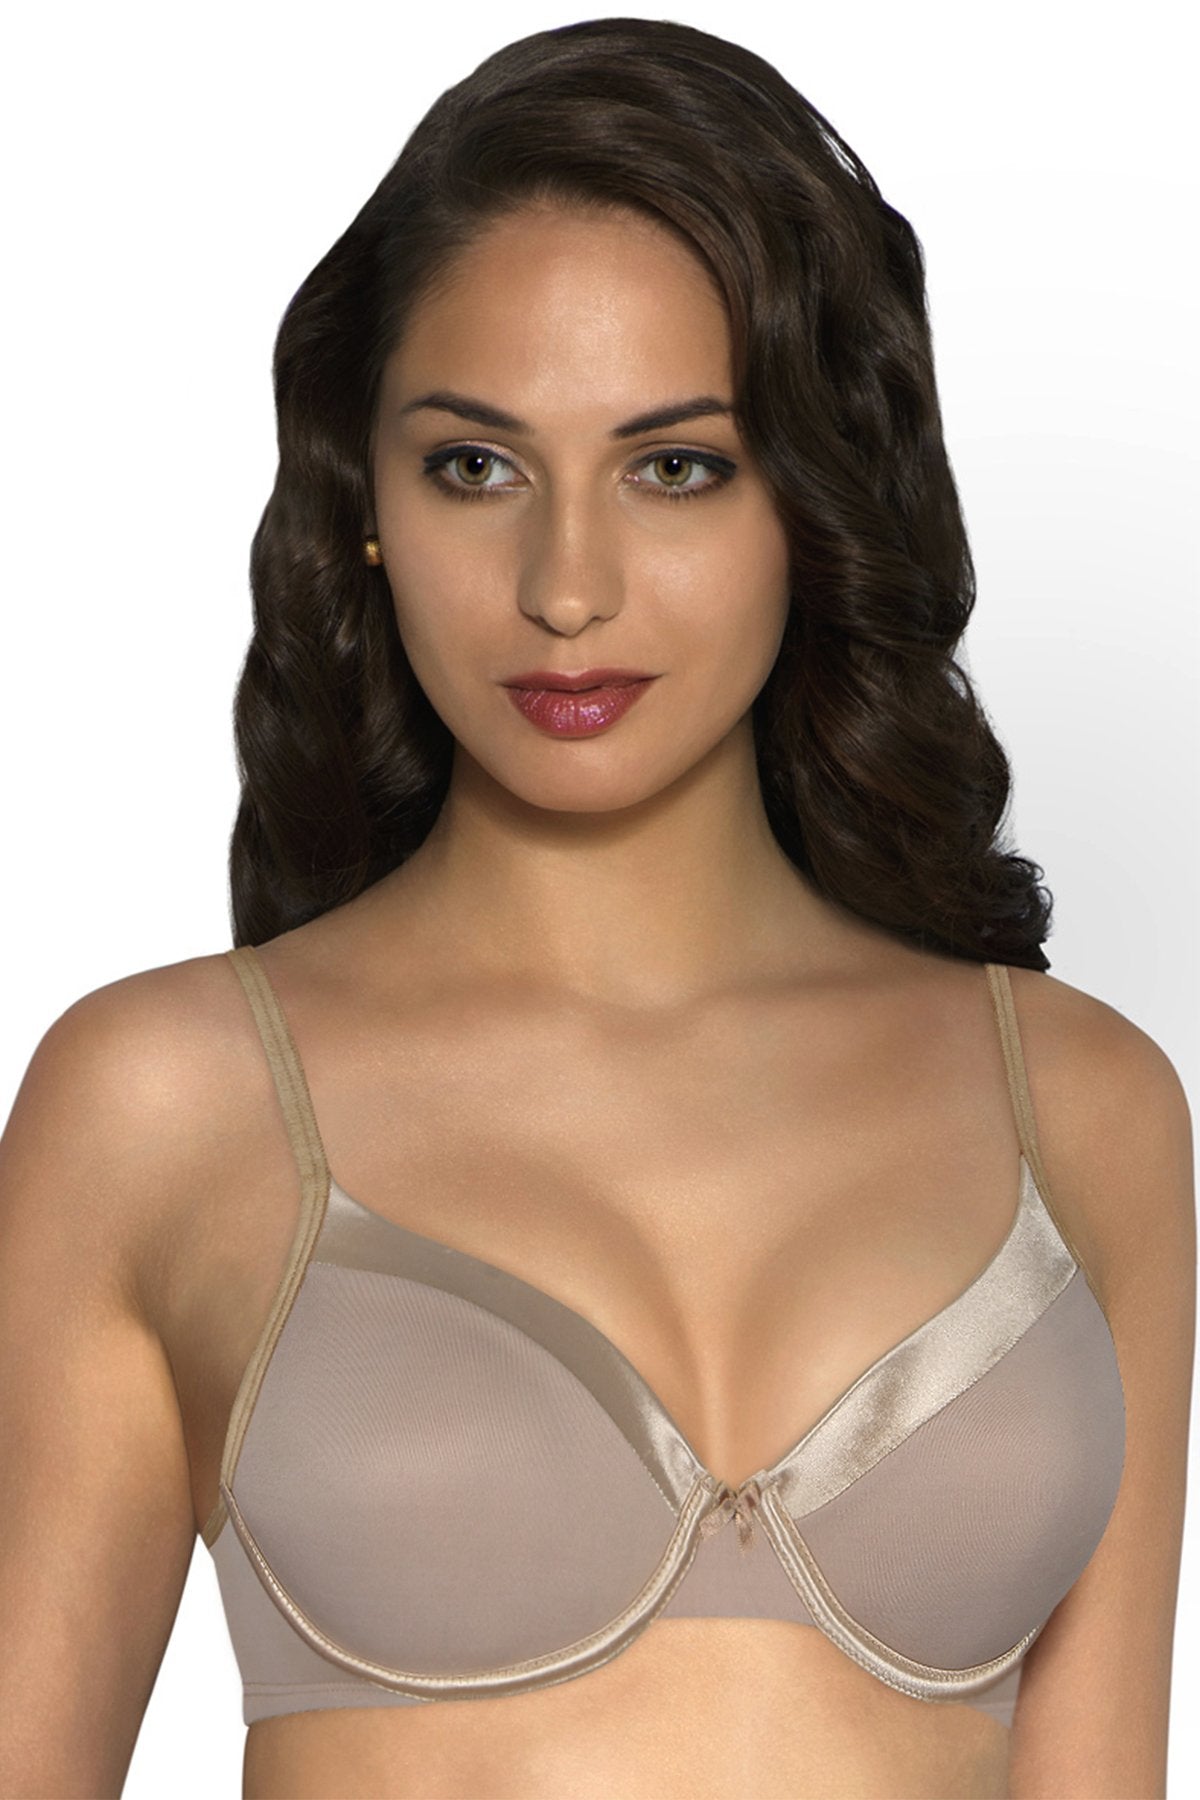 Summer Switch Padded Wired Reversible Bra